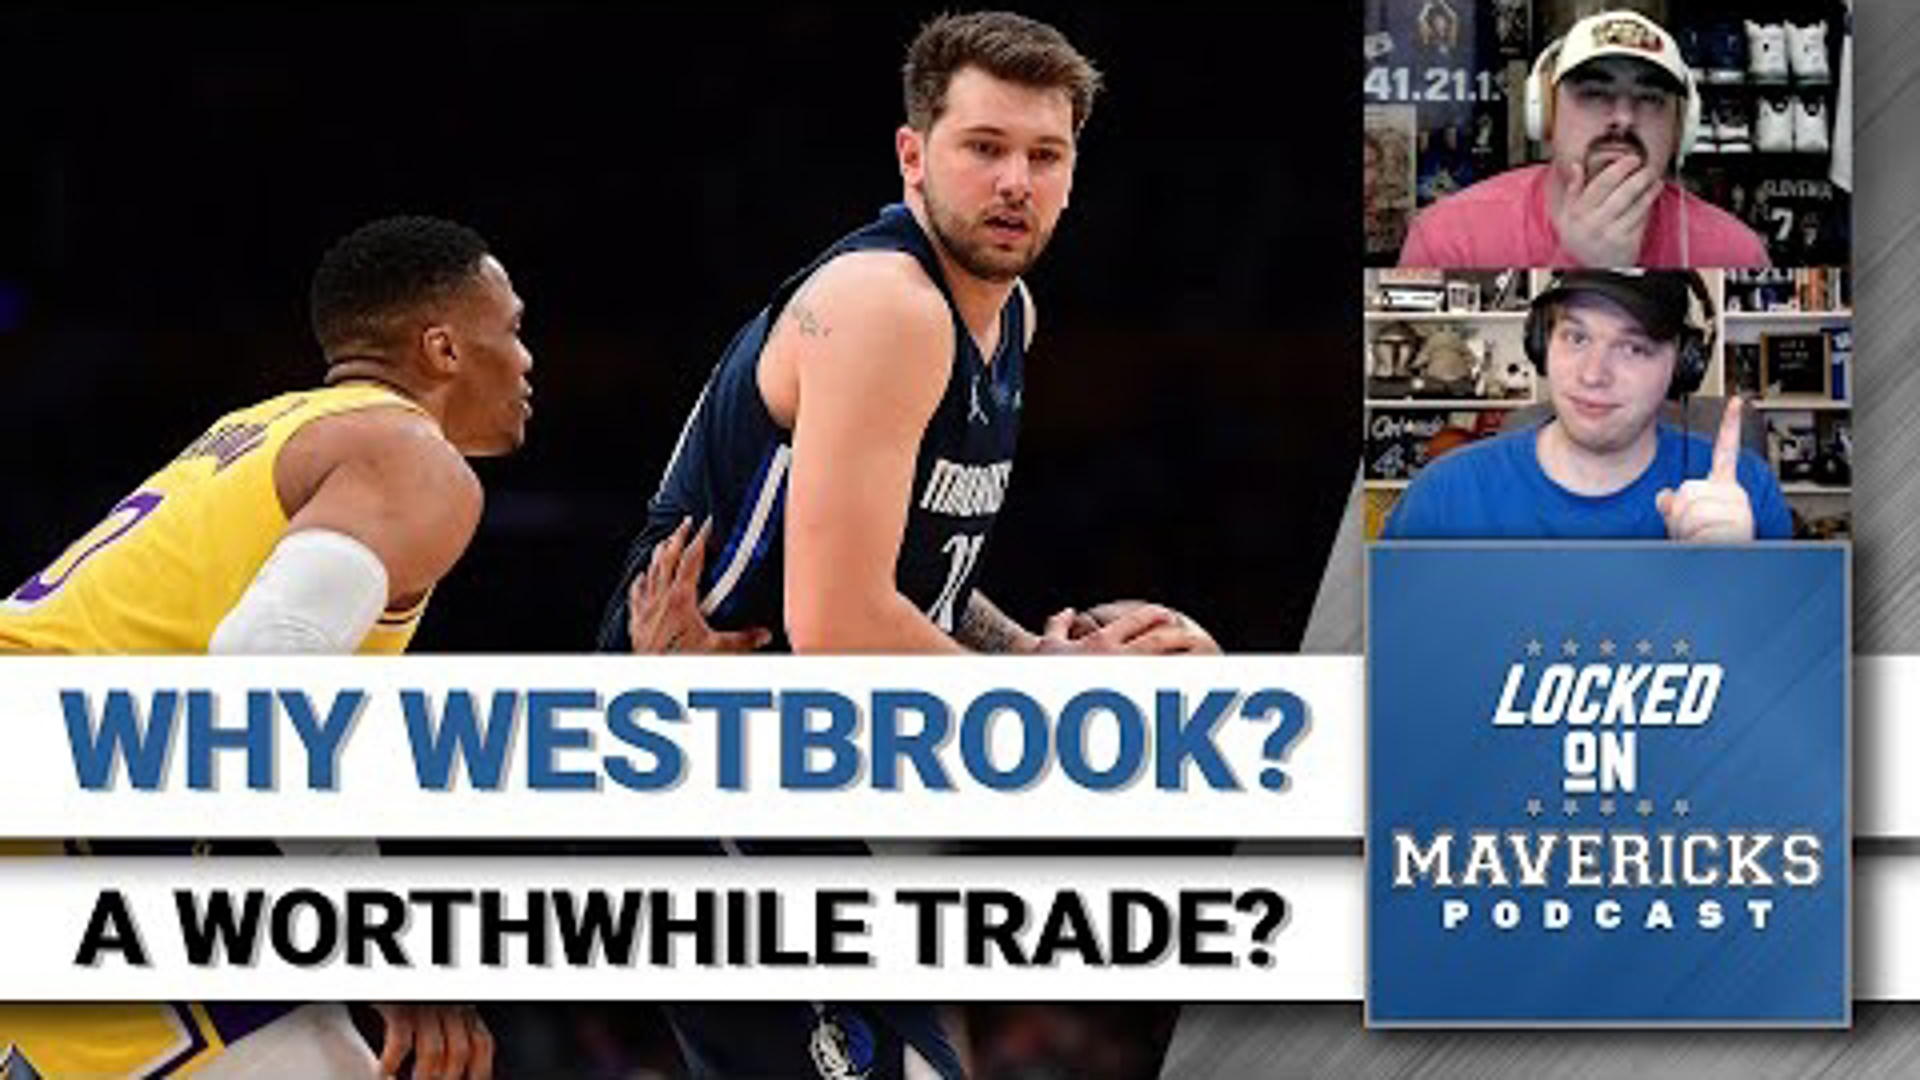 Nick Angstadt & Isaac Harris discuss why a Russell Westbrook trade makes sense for the Mavs in one way.